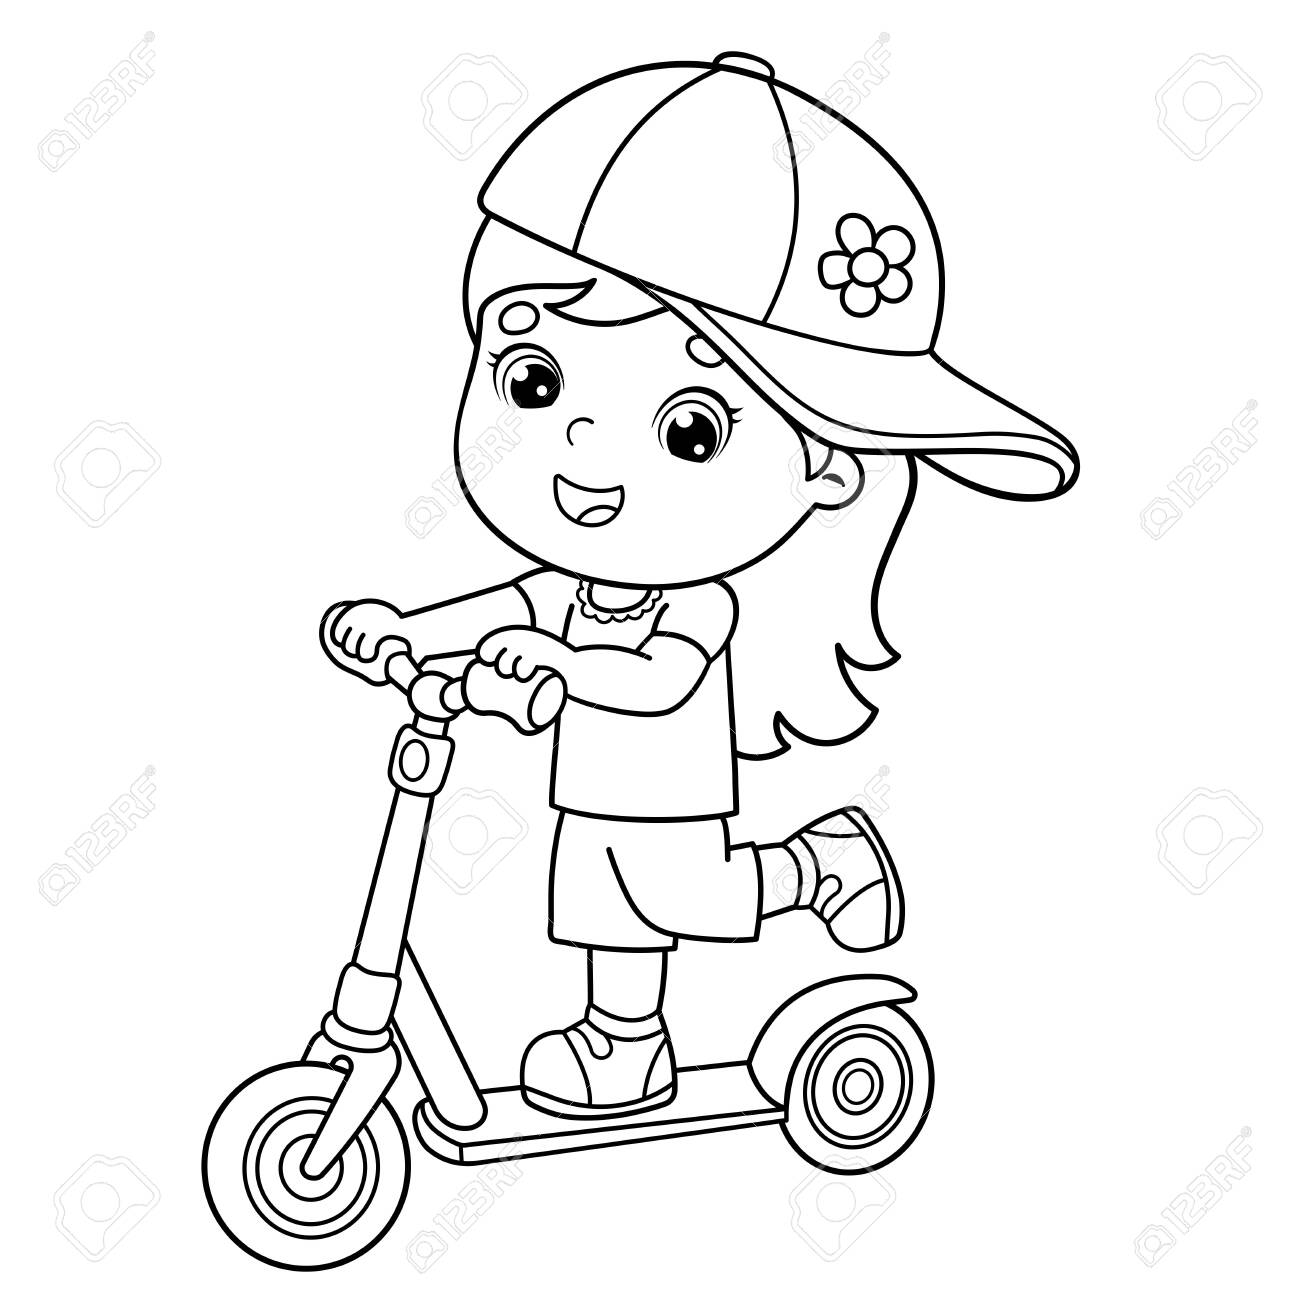 Coloring page outline of cartoon girl on the scooter coloring book for kids royalty free svg cliparts vectors and stock illustration image